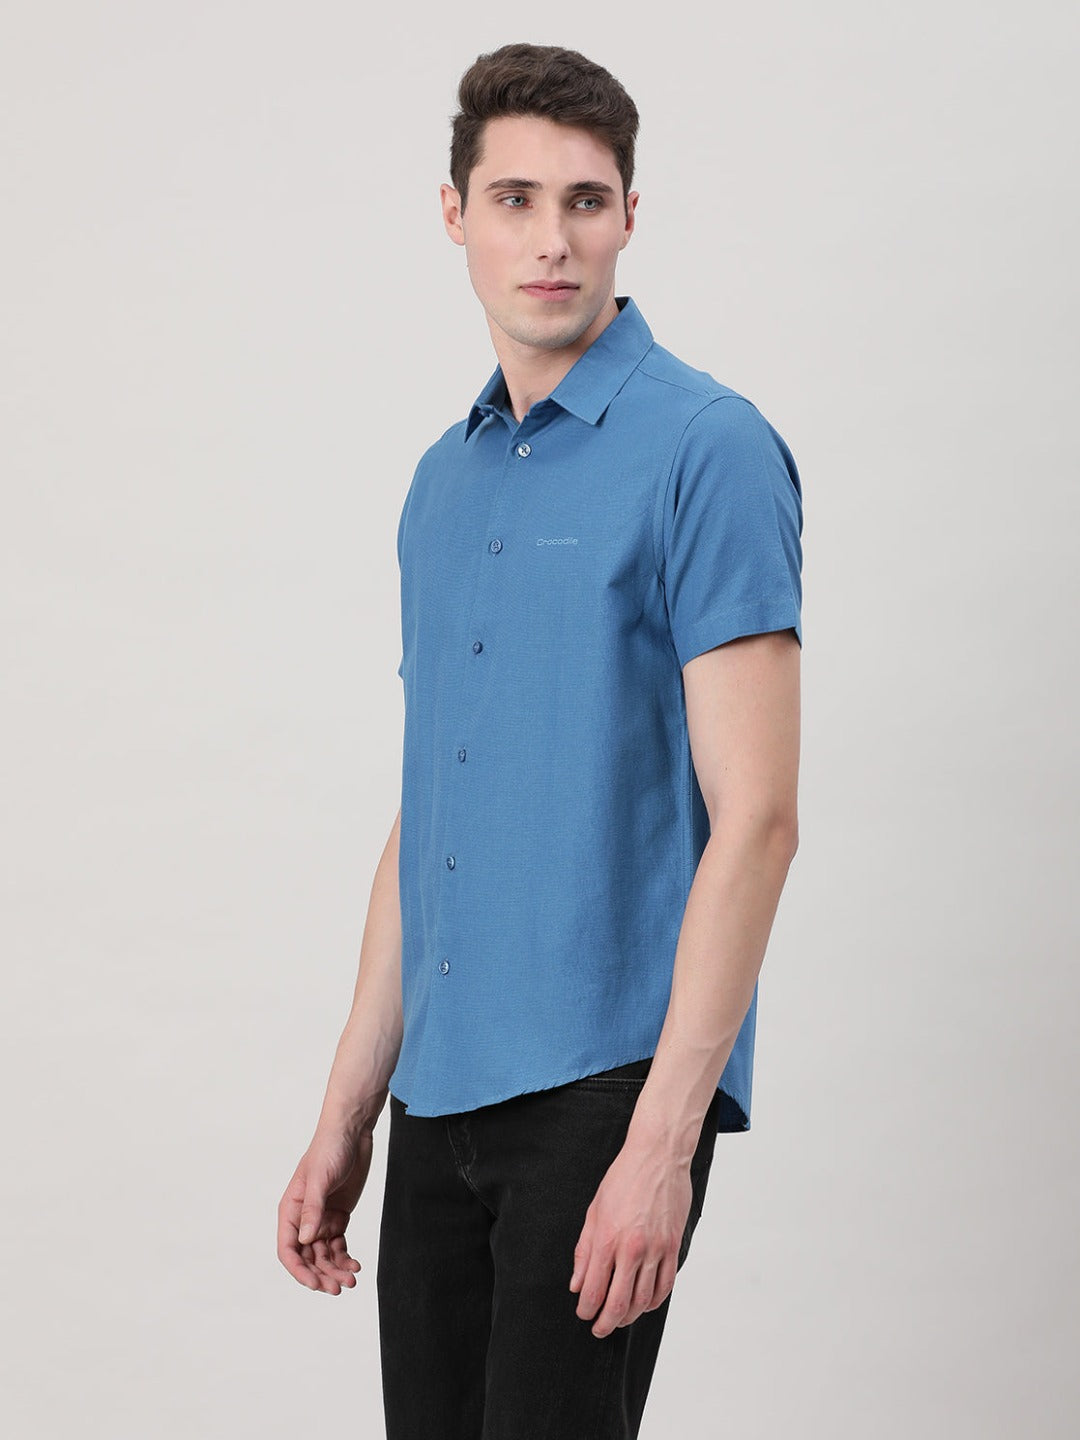 Casual Royal Blue Half Sleeve Comfort Fit Solid Shirt with Collar for Men